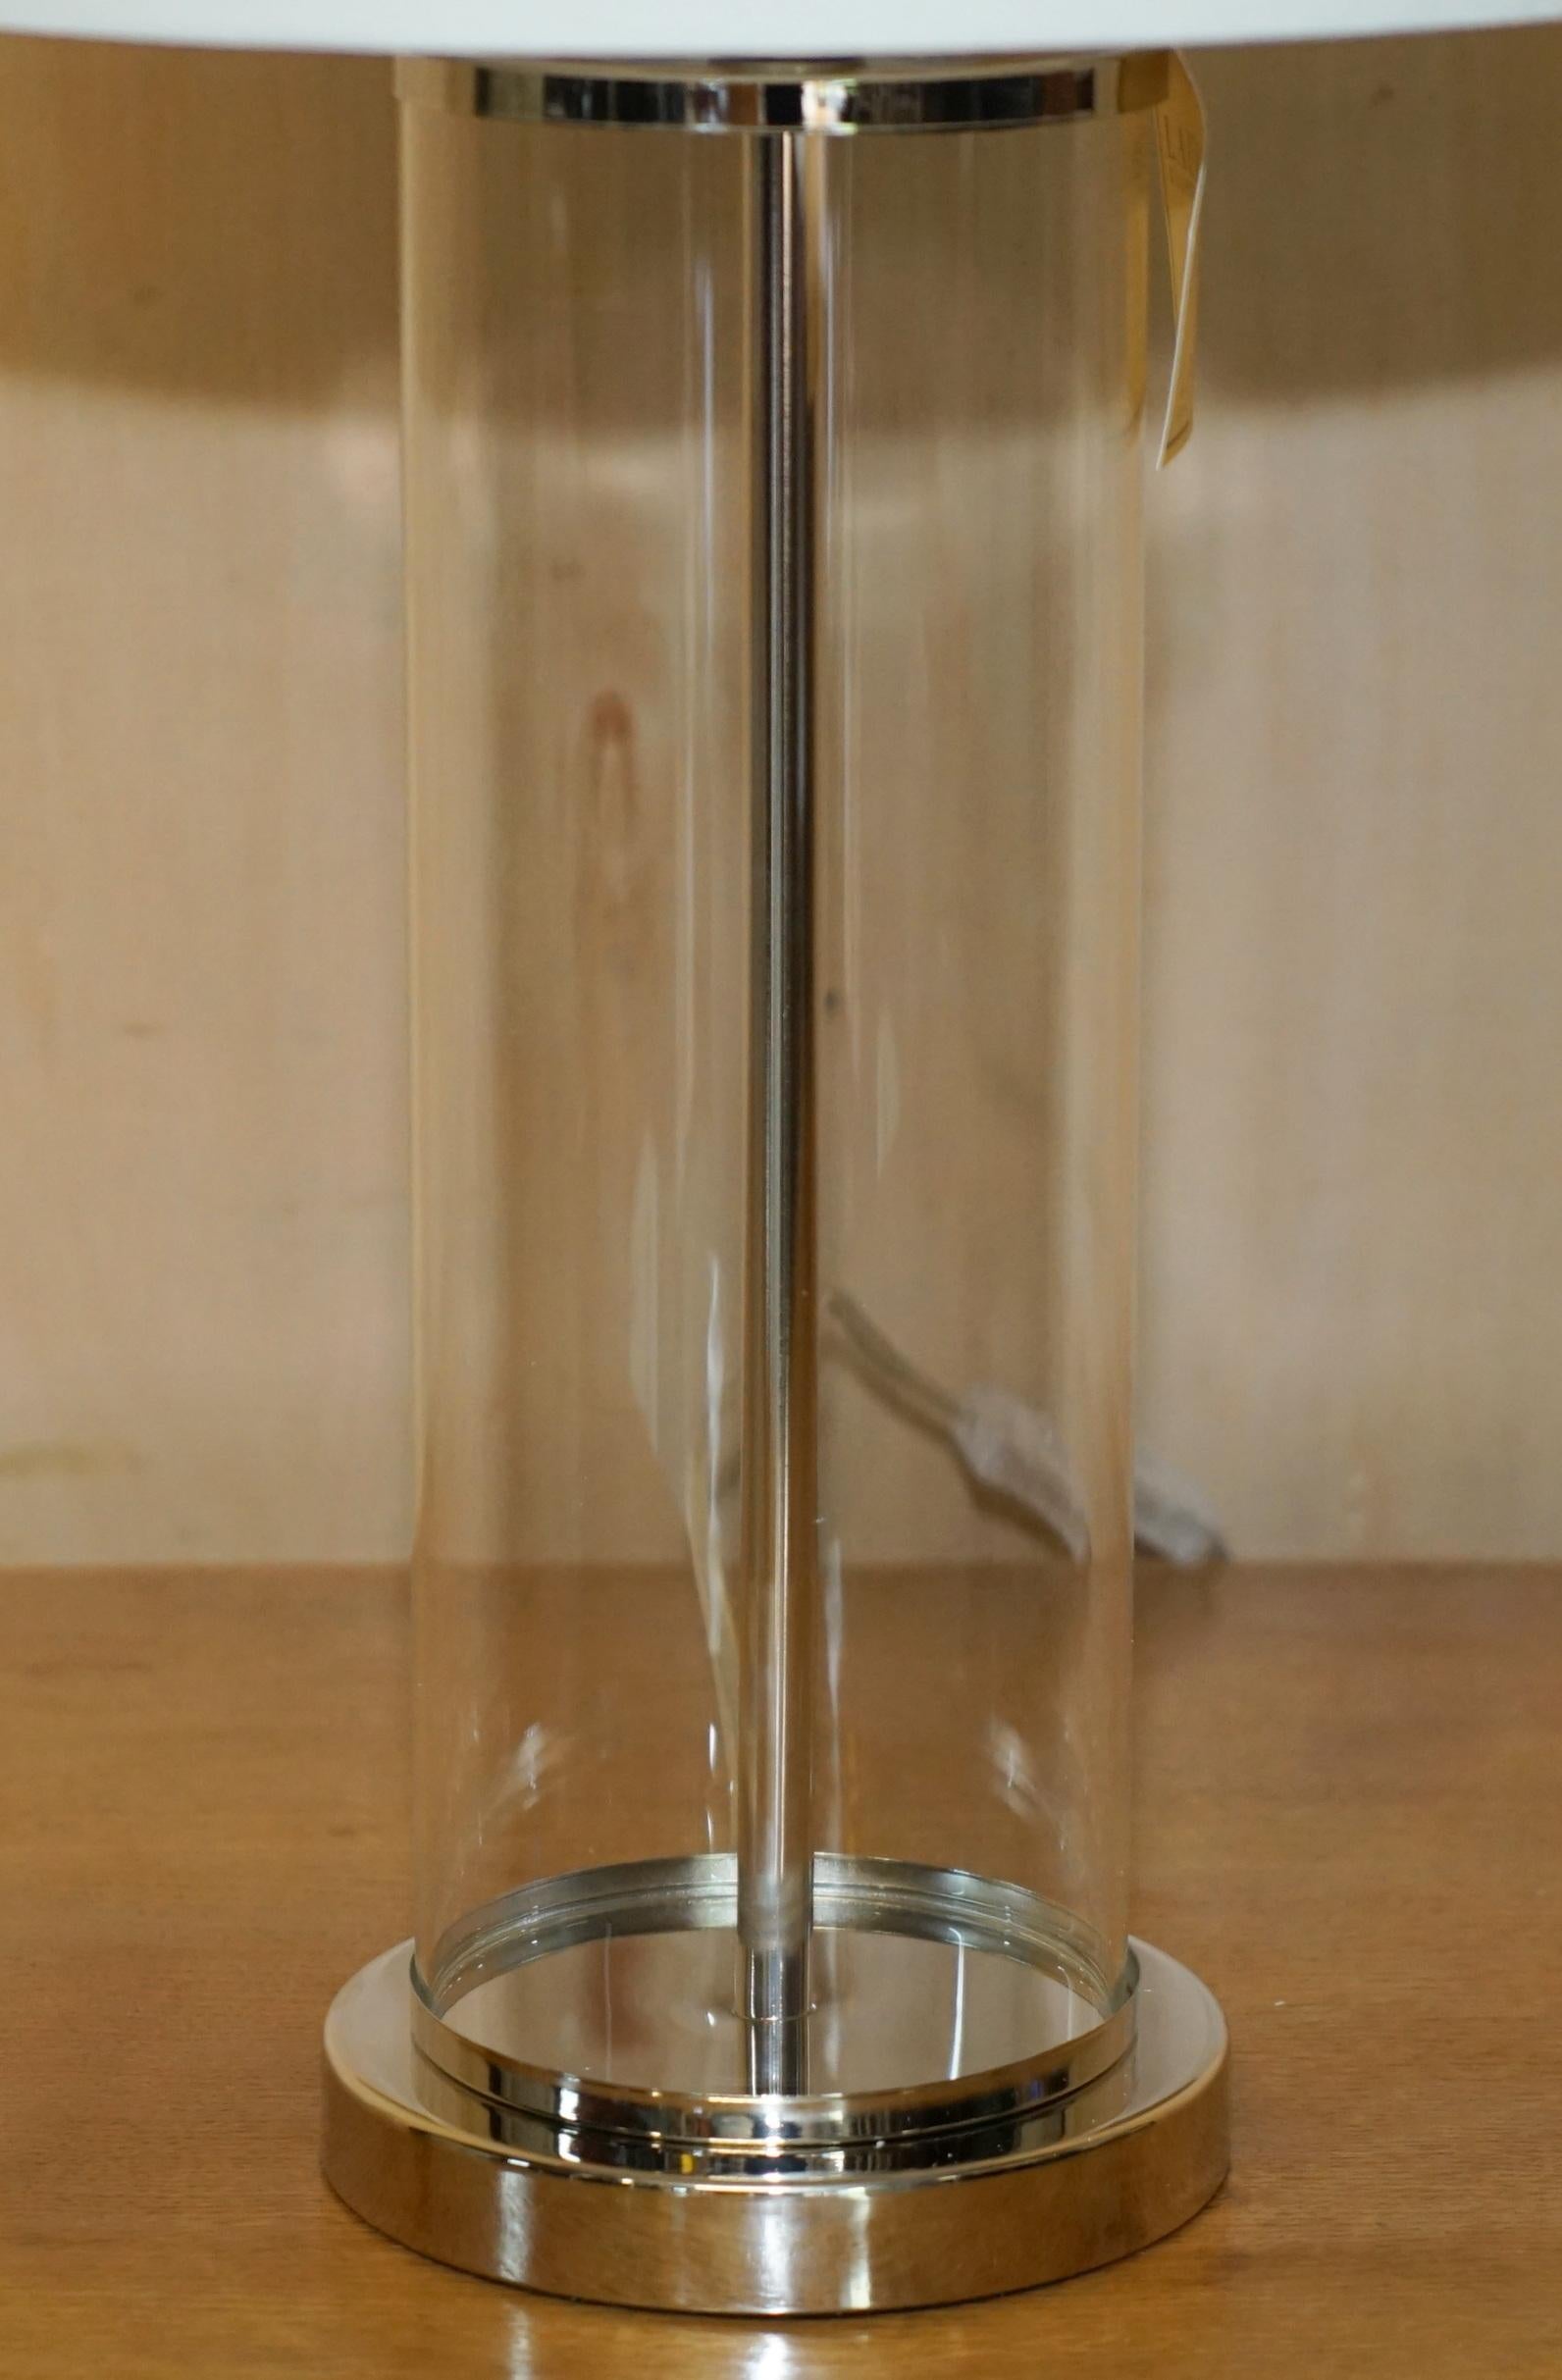 English 1 OF 2 BRAND NEW IN THE BOX RALPH LAUREN SiLVER STORM LANTERN GLASS TABLE LAMPS For Sale